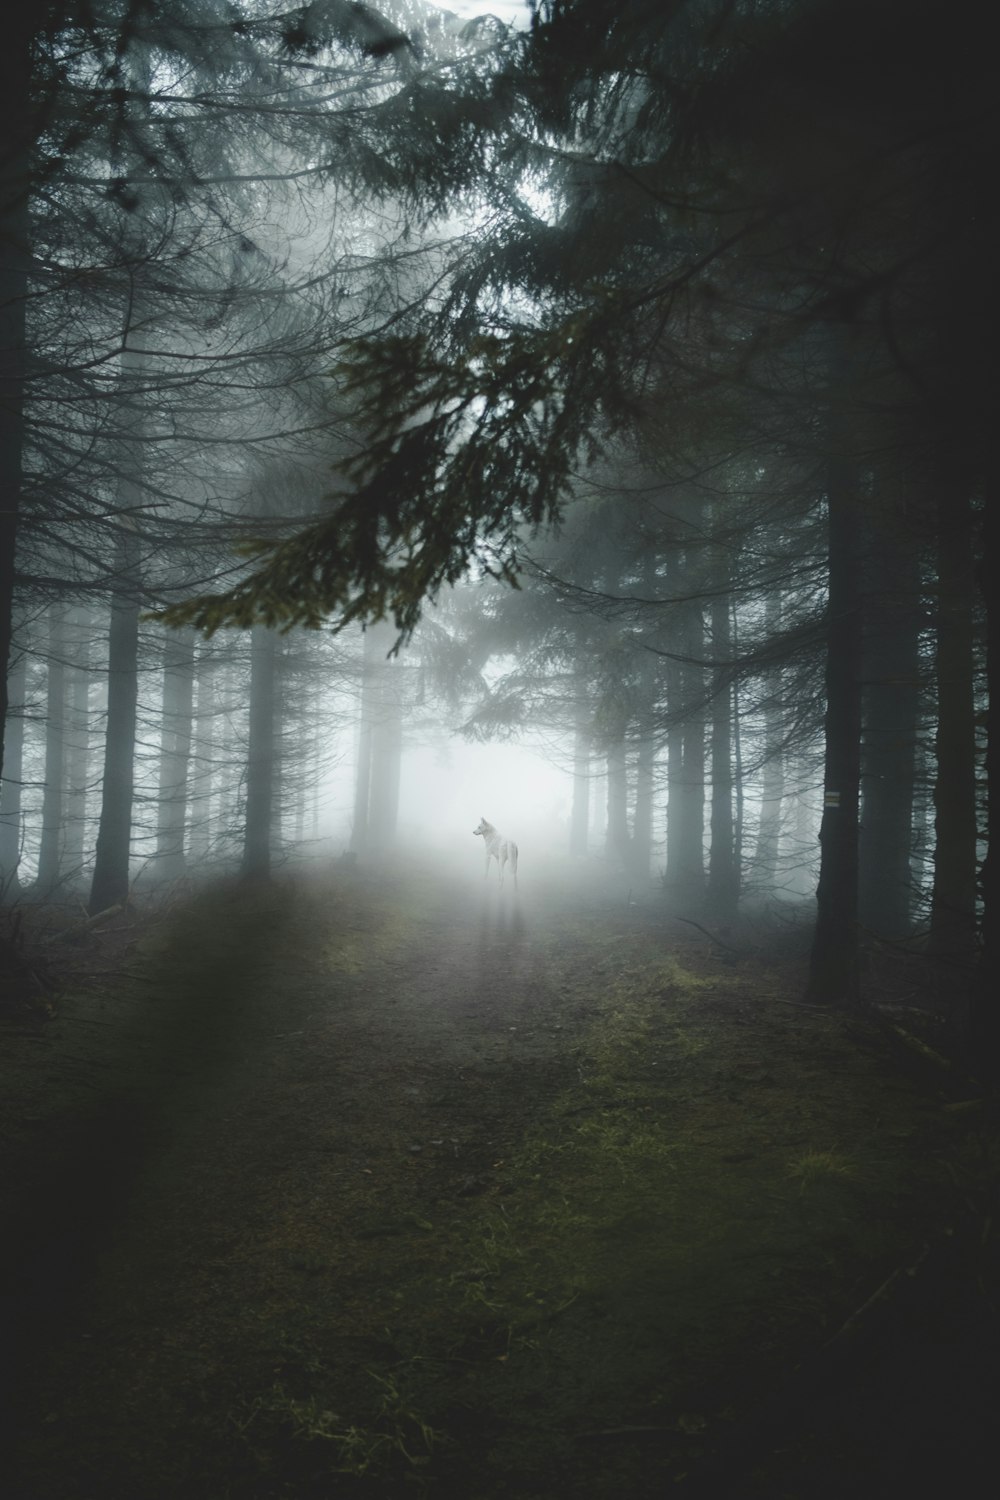 dogs in middle of tall trees during foggy weather